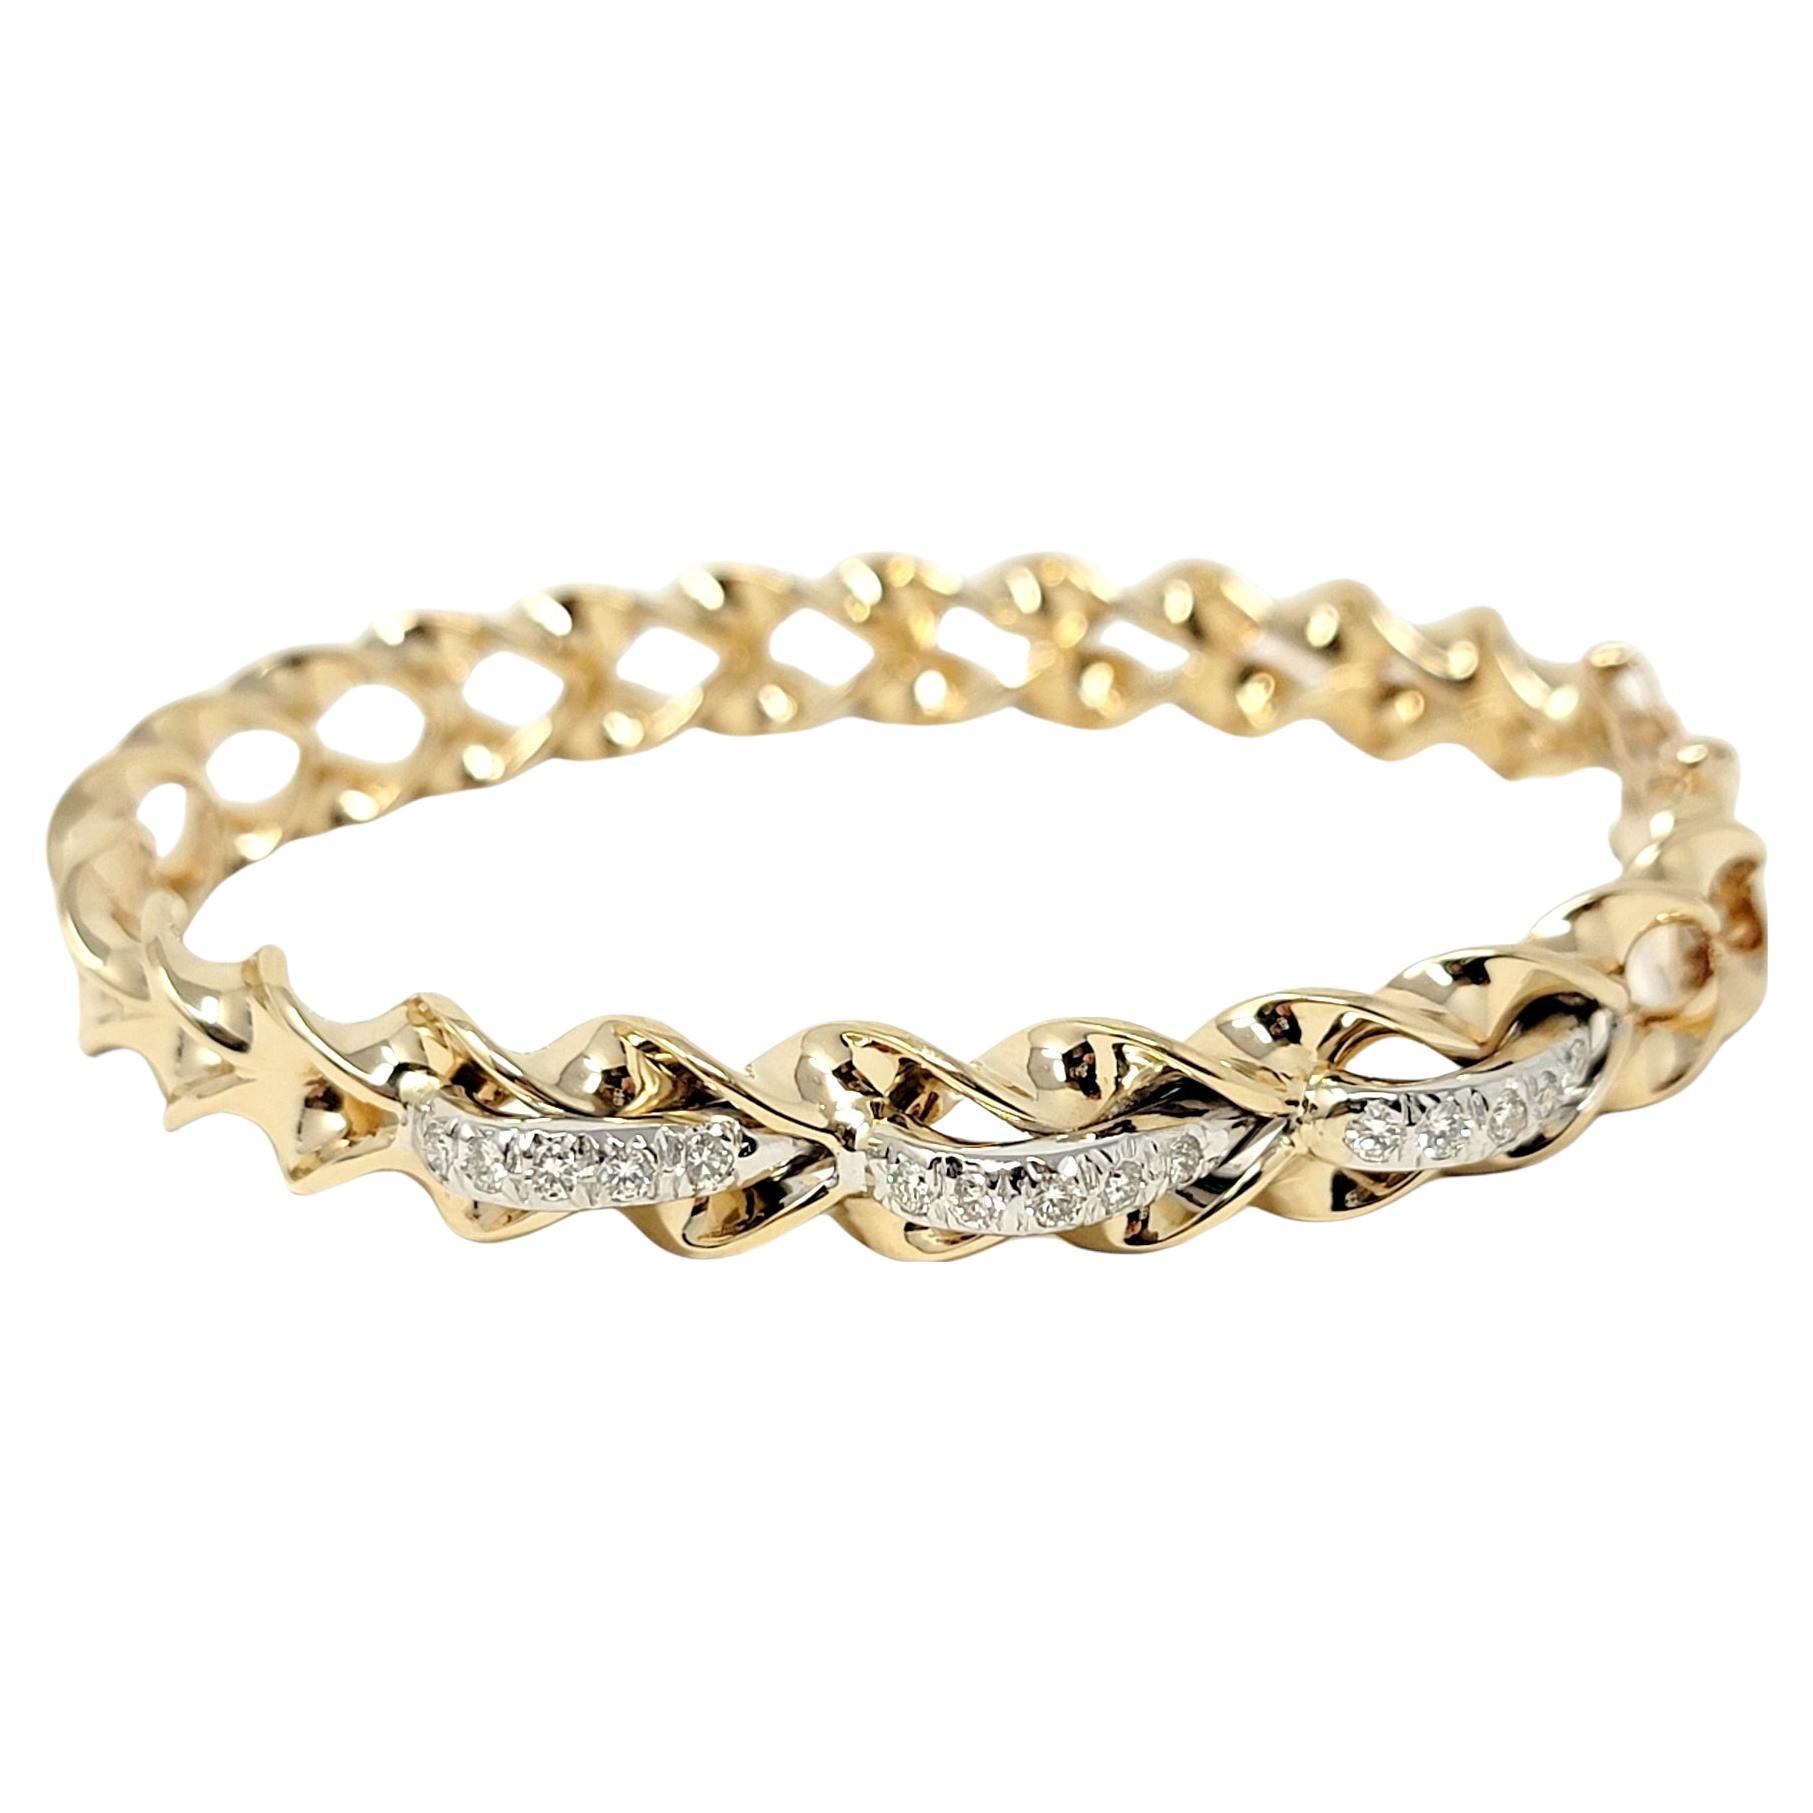 Uniquely designed contemporary bangle bracelet with sleek diamond wave design. This beautiful bracelet is made of polished 14 karat yellow gold and features a hinged side opening. The top half of the bracelet has a modern wave design and is set with